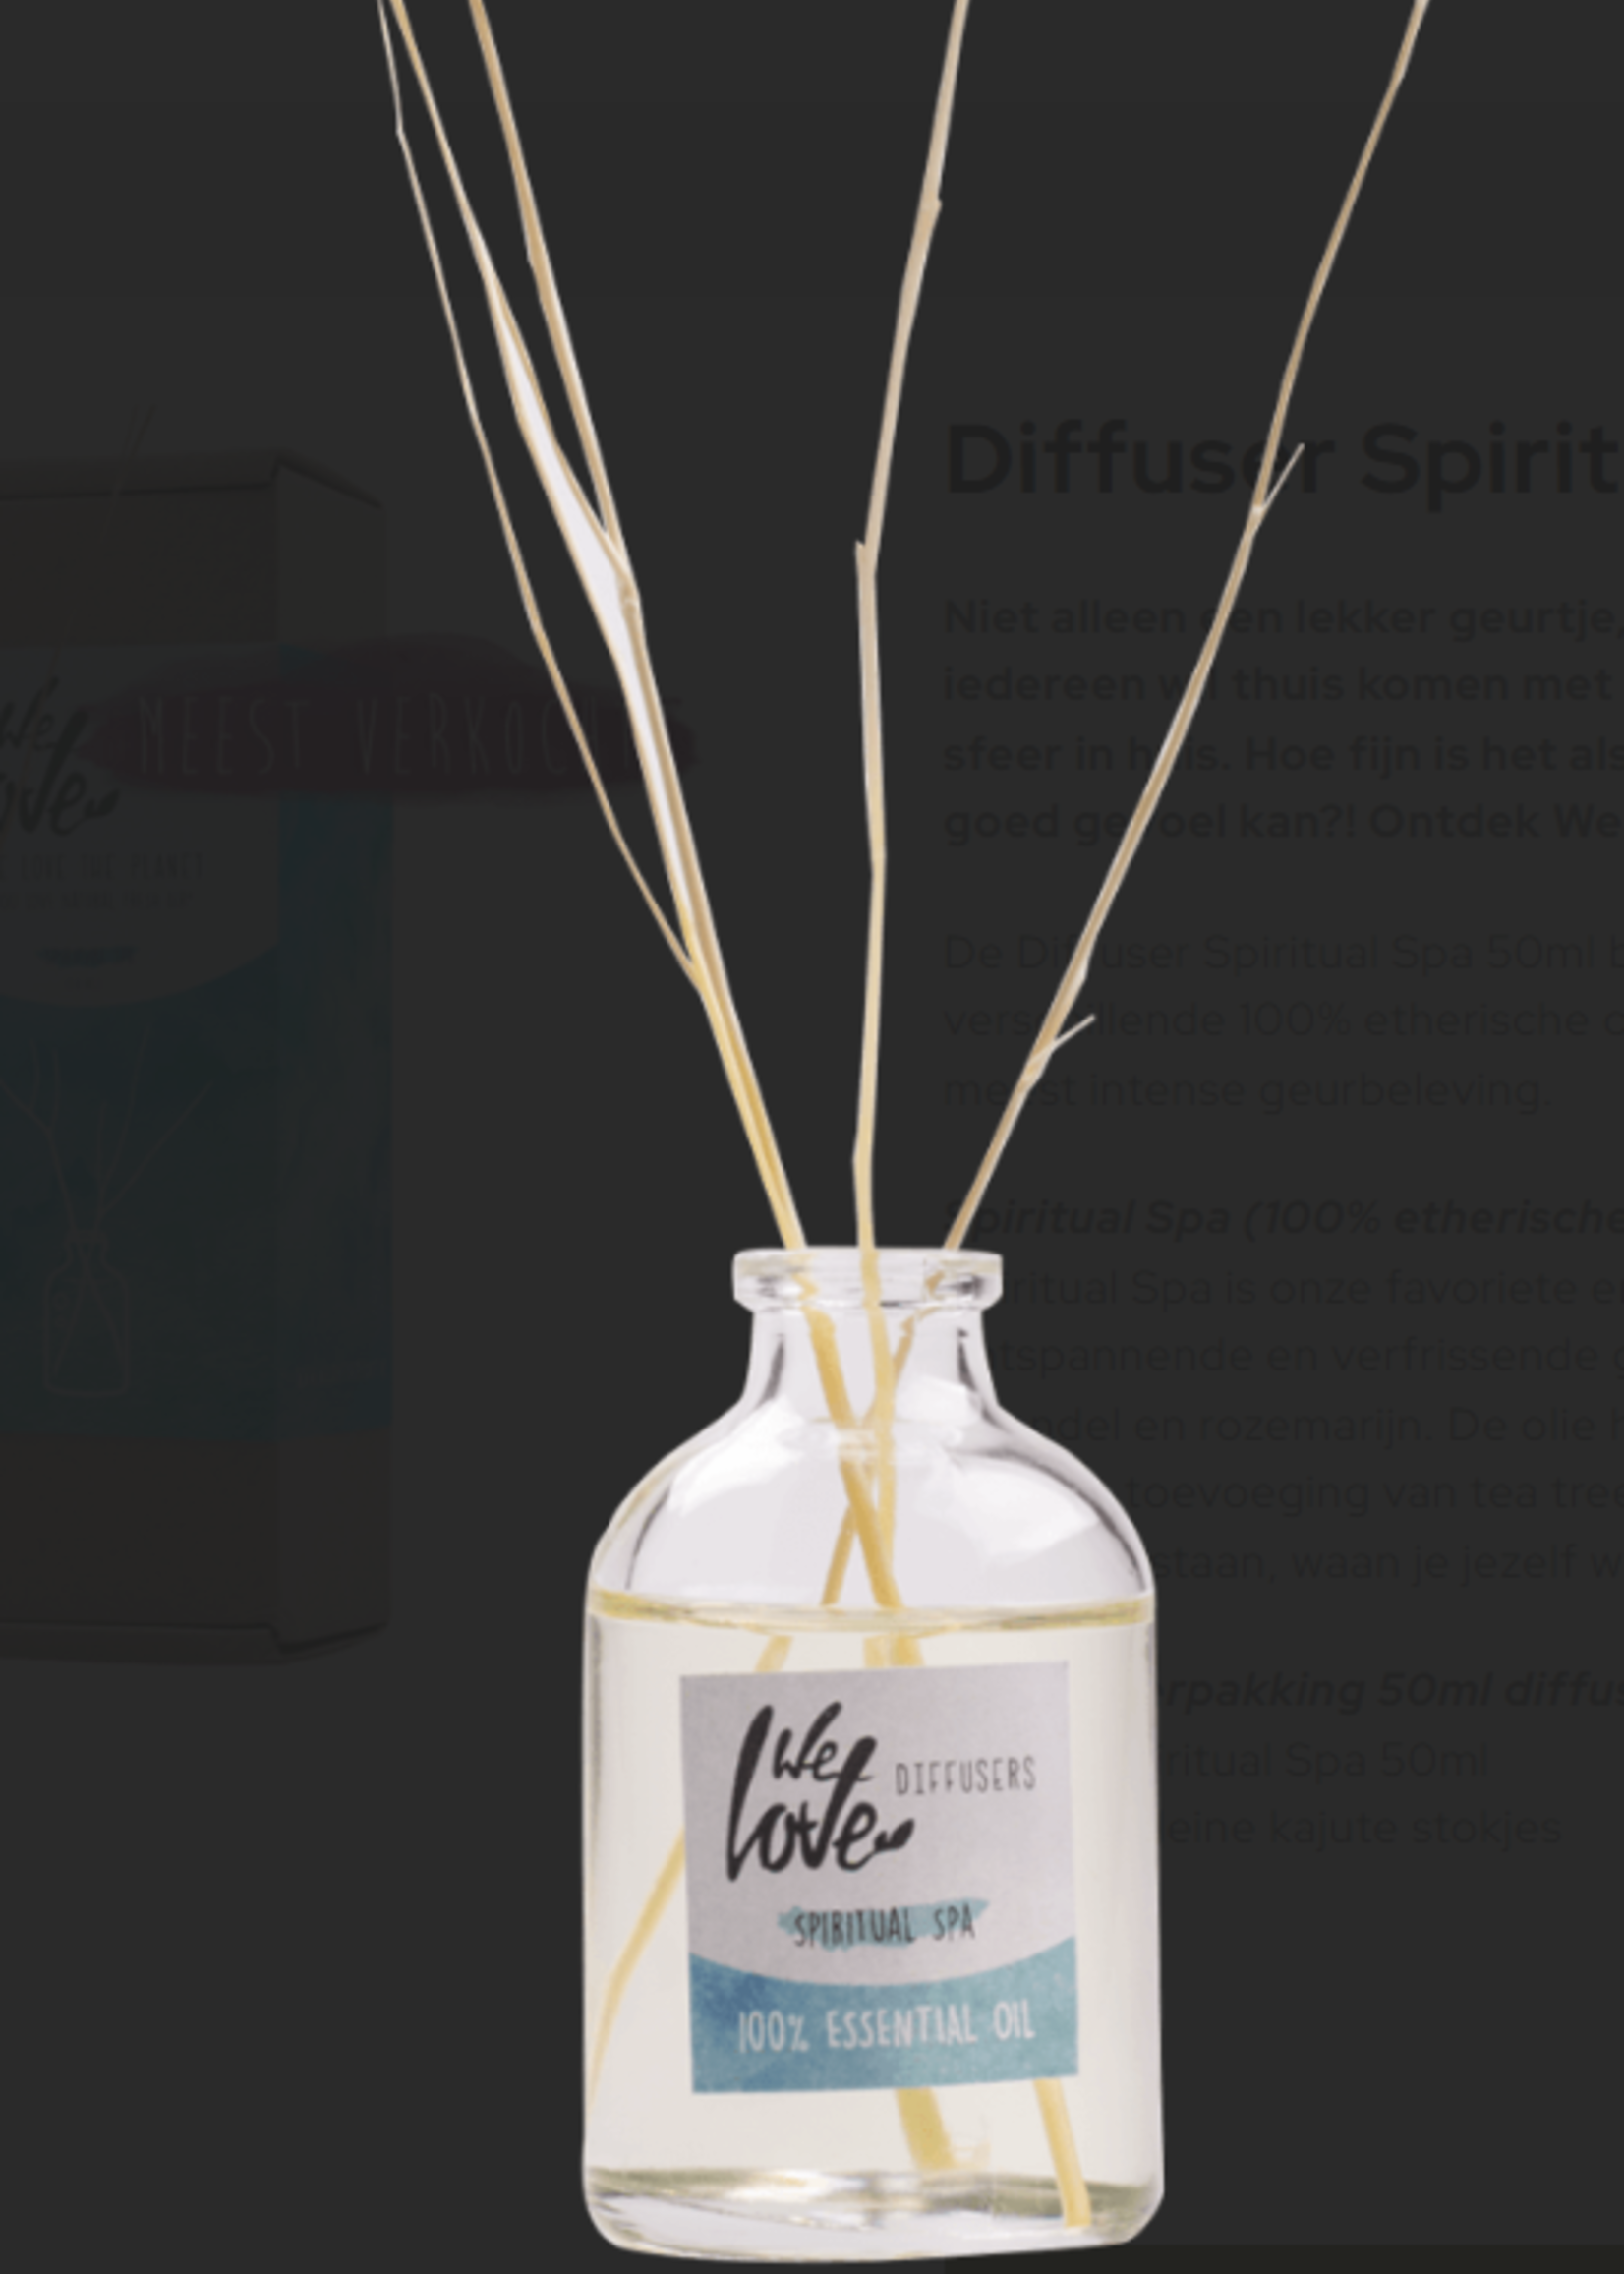 we love the planet We love the Planet diffuser Spiritual Spa 50 ml